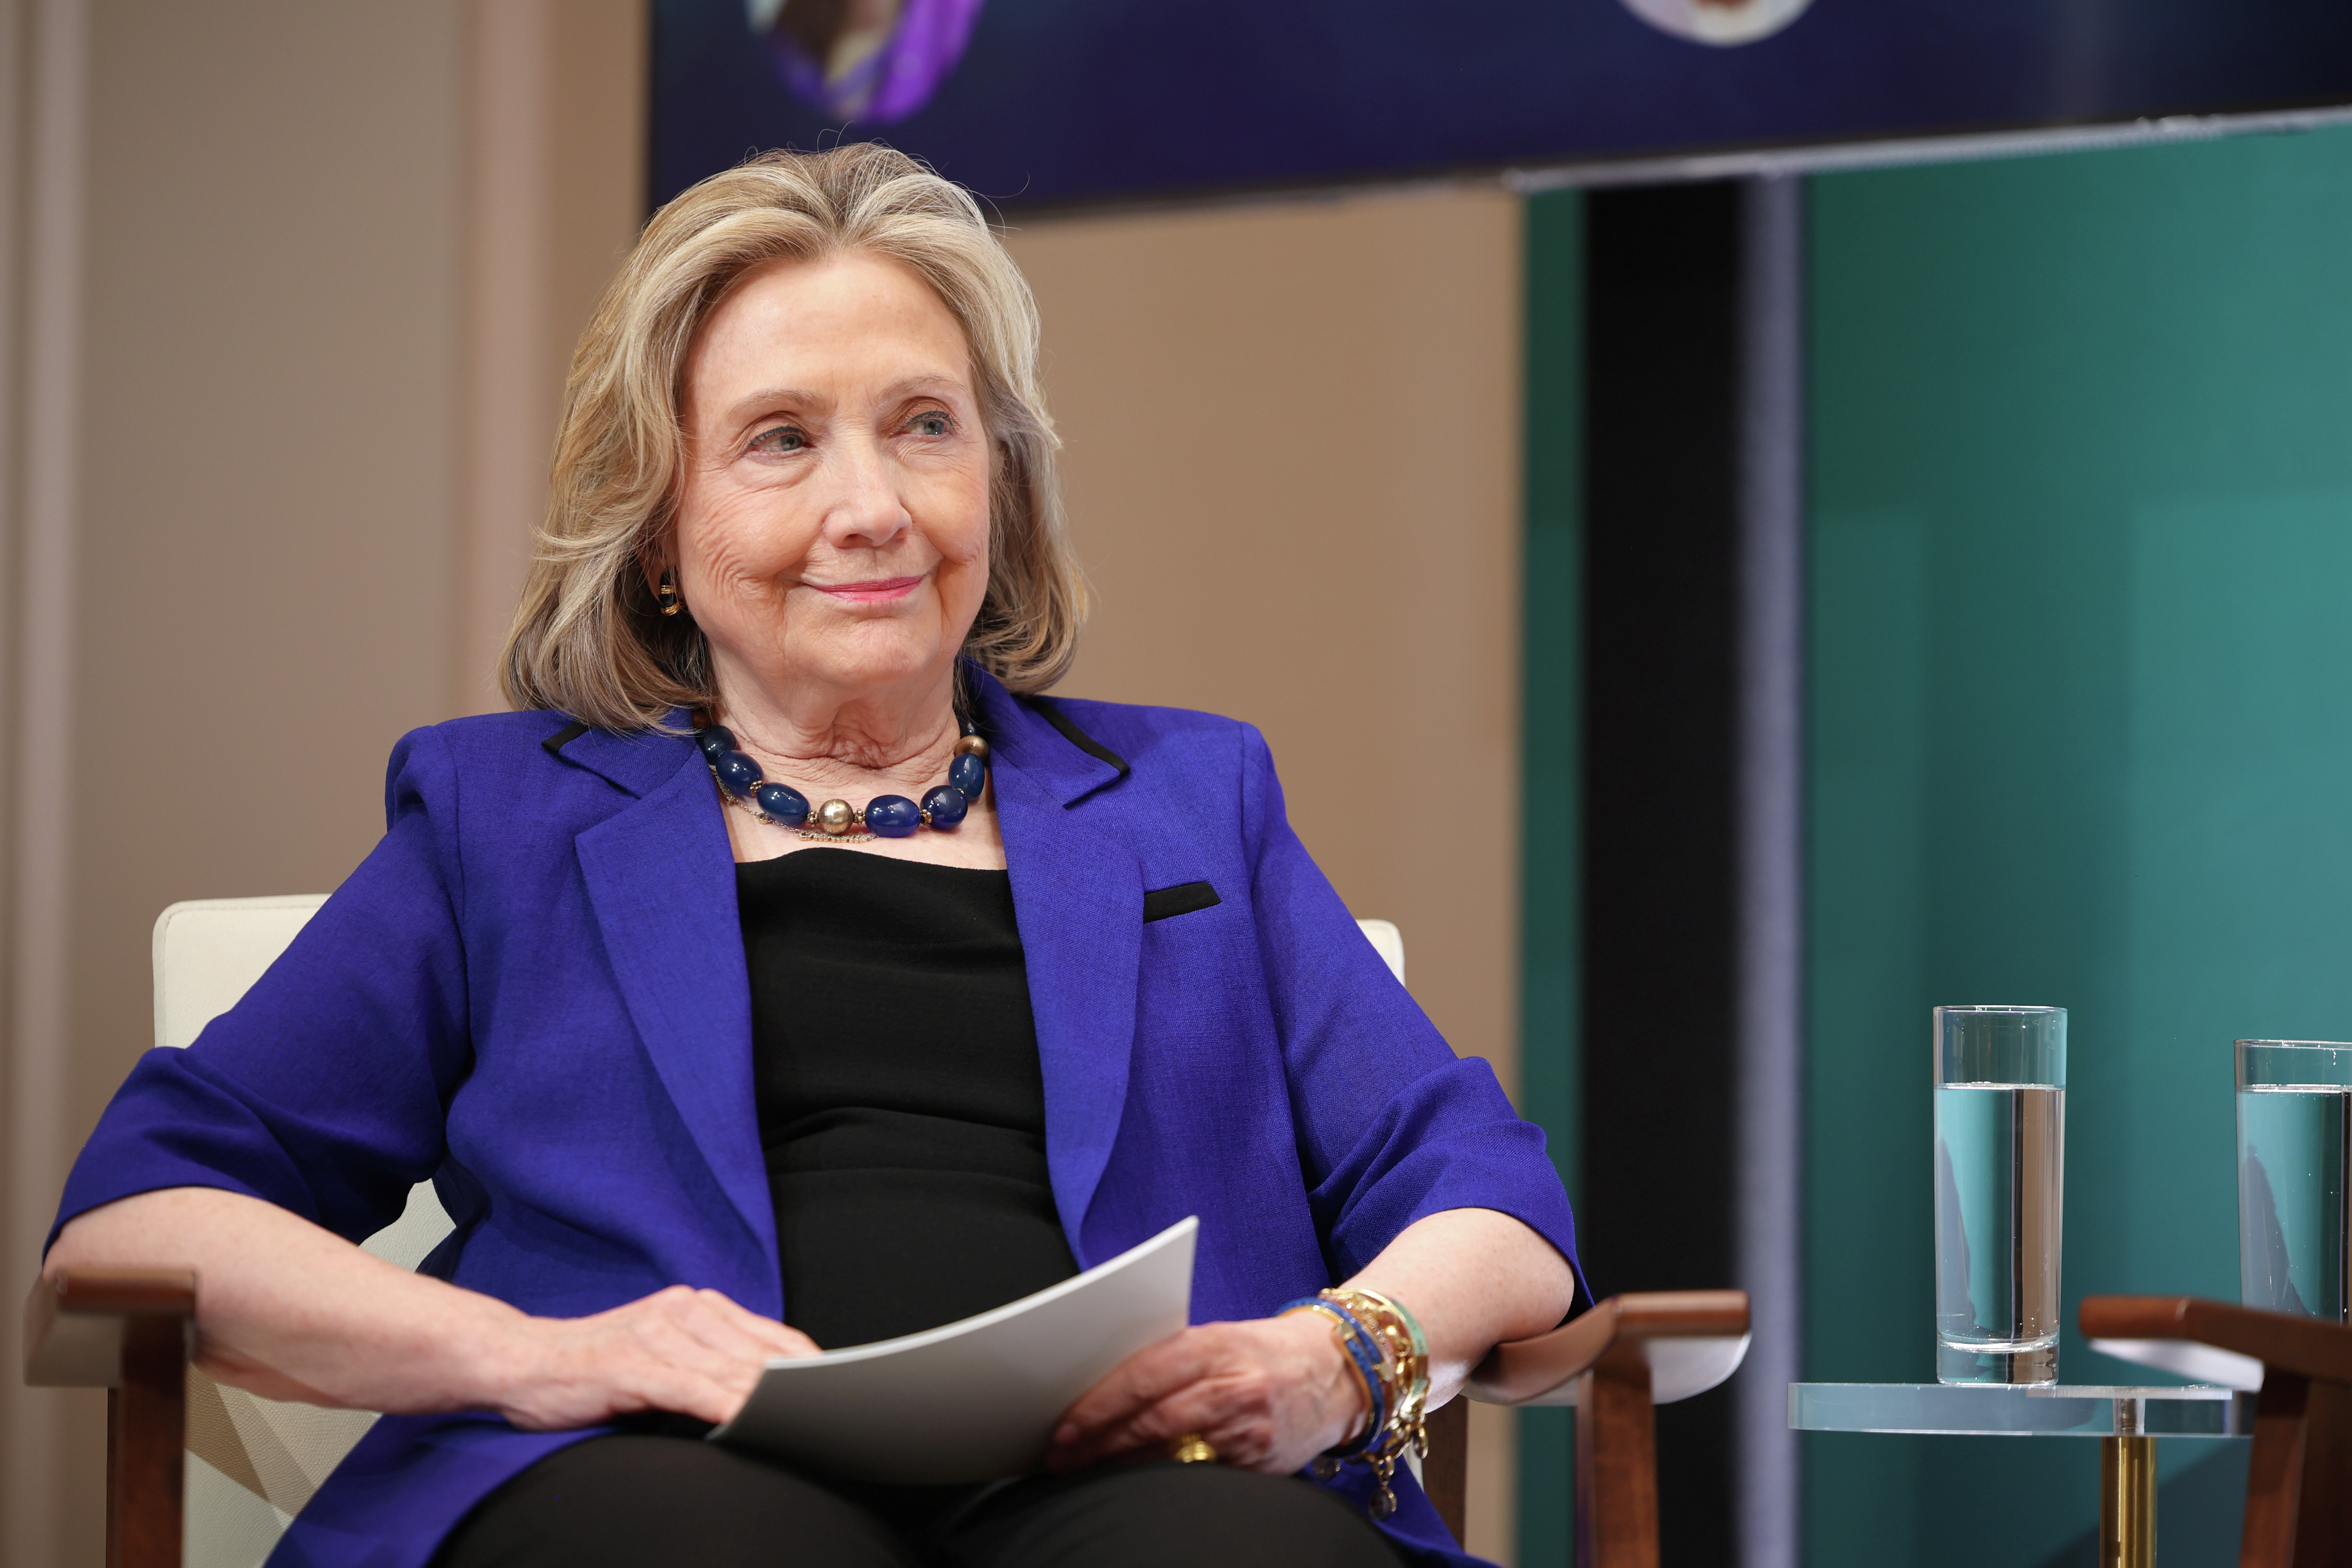 NEWSLINE: How the landscape has changed for women since Hillary's historic presidential run